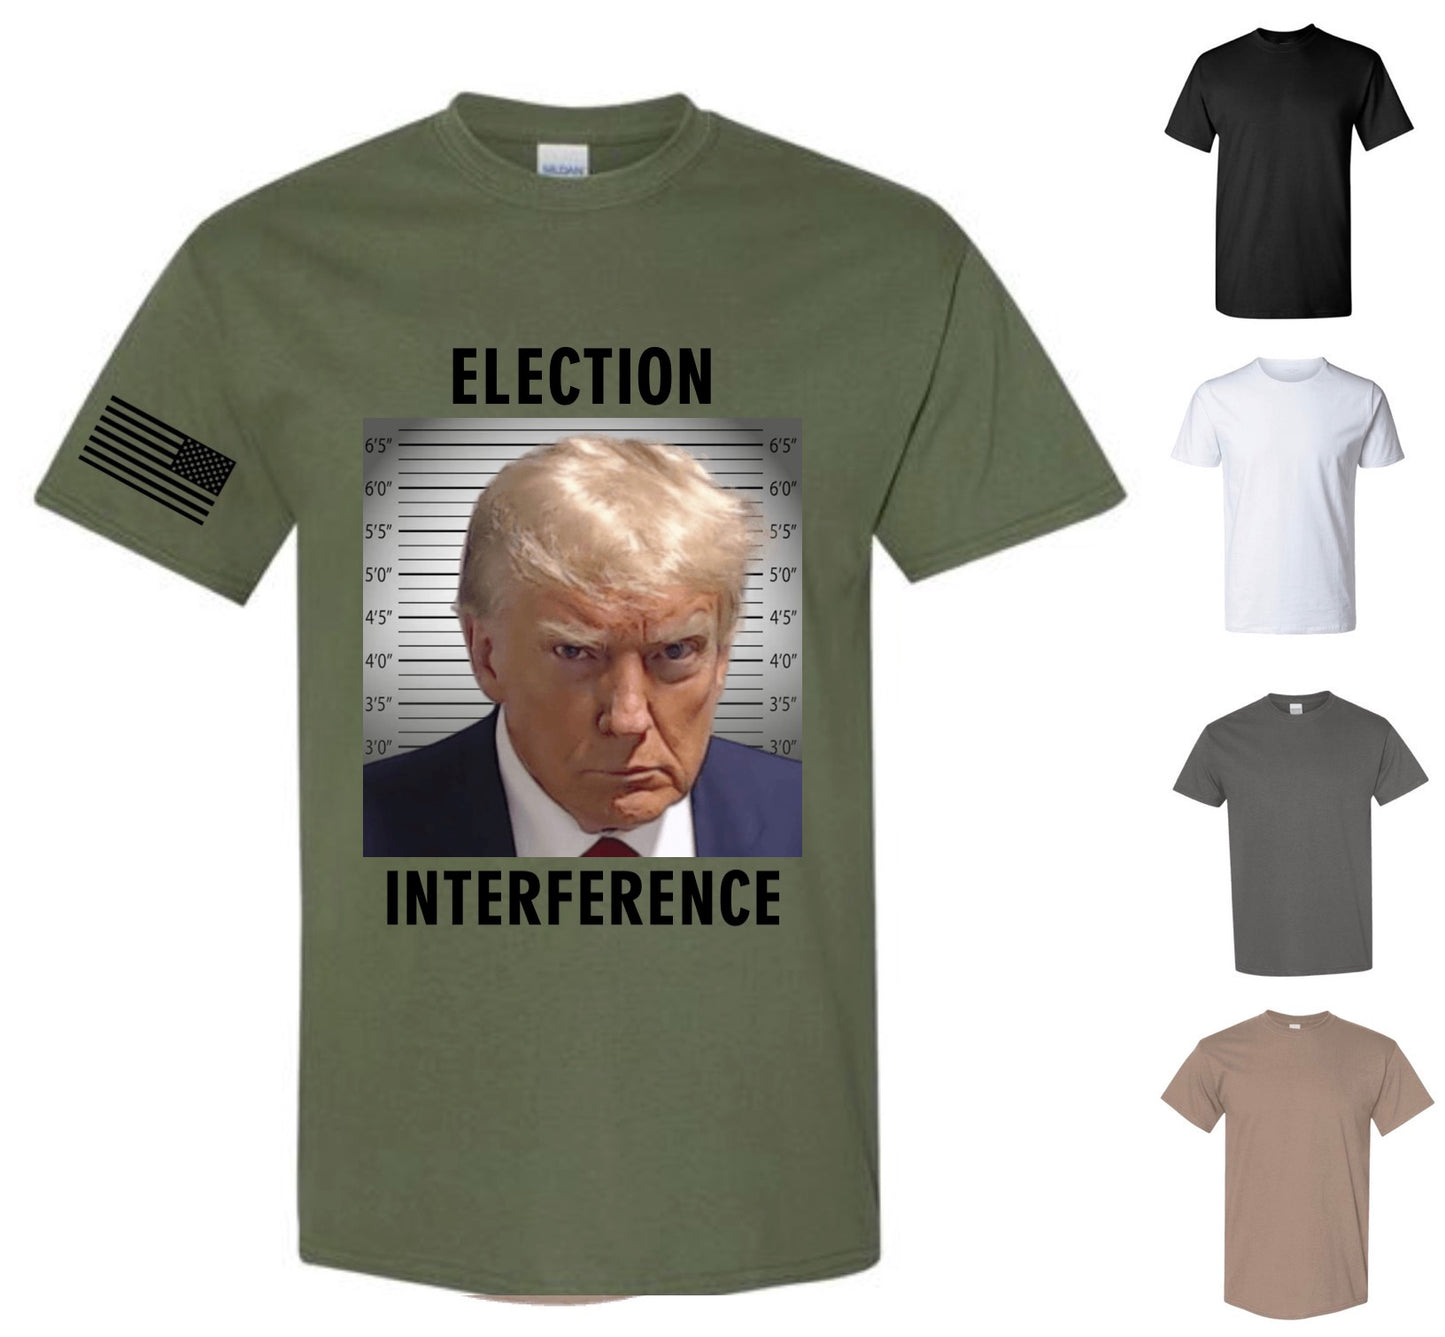 Election Interference T-Shirt — Free Shipping!